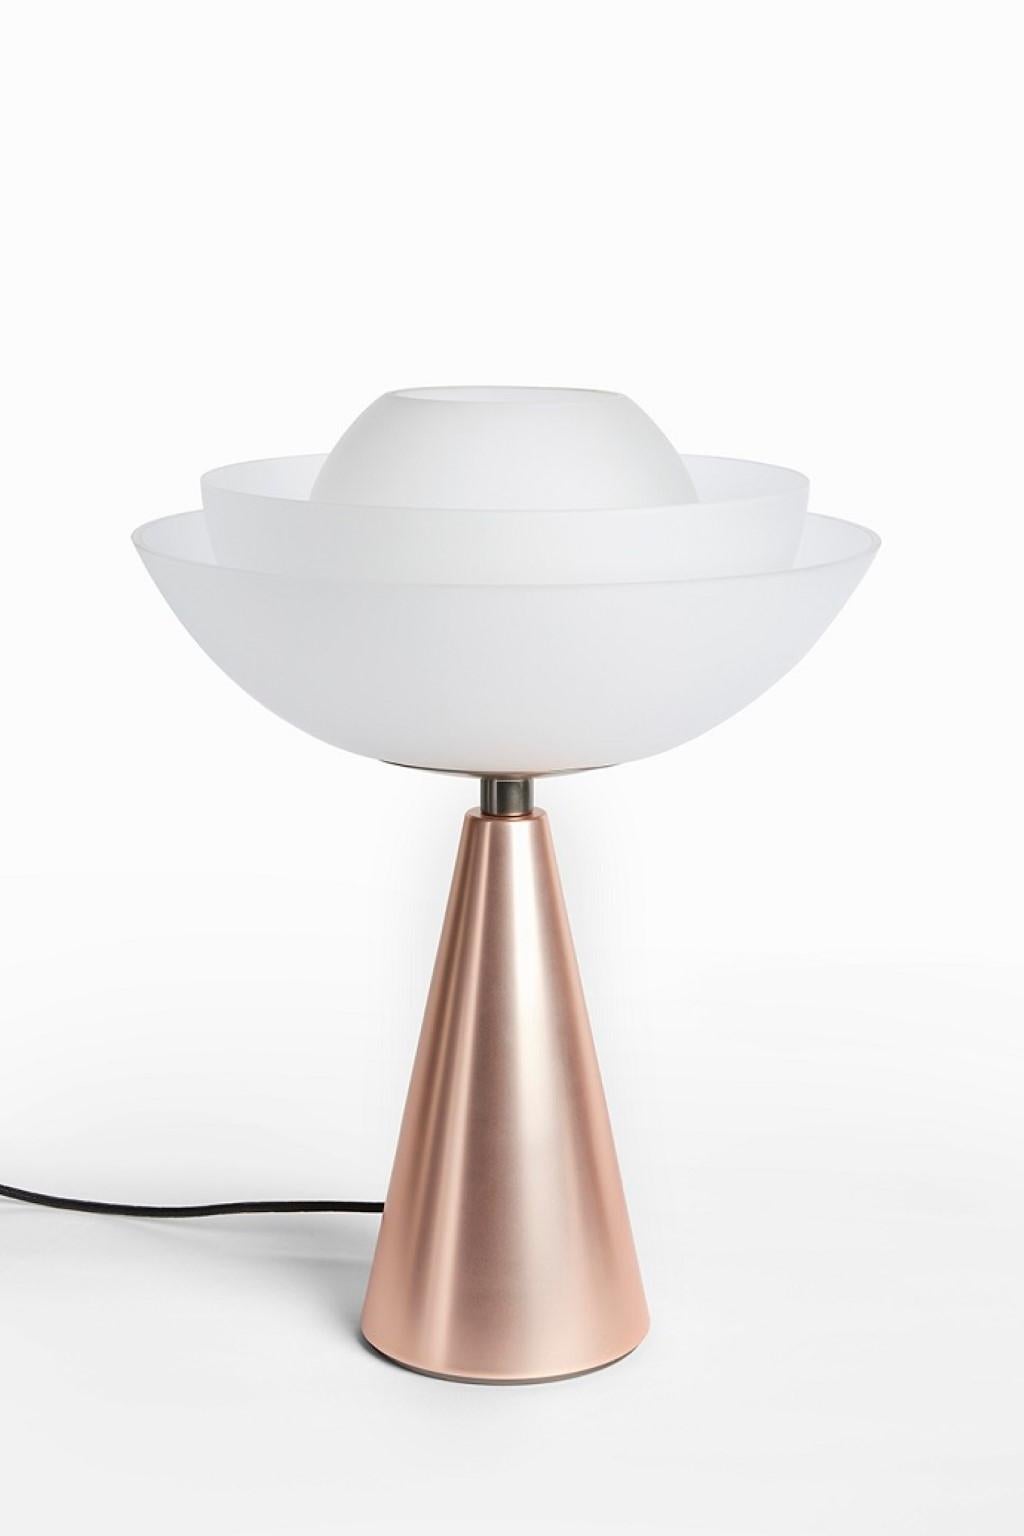 Pair of Lotus table lamps by Mason Editions
Dimensions: 36 × 48 cm
Materials: matte gold 24k base + transparent smoke grey blown glass
Finishings: 
Matte gold 24k base + transparent smoke grey blown glass
Polished champagne gold base +